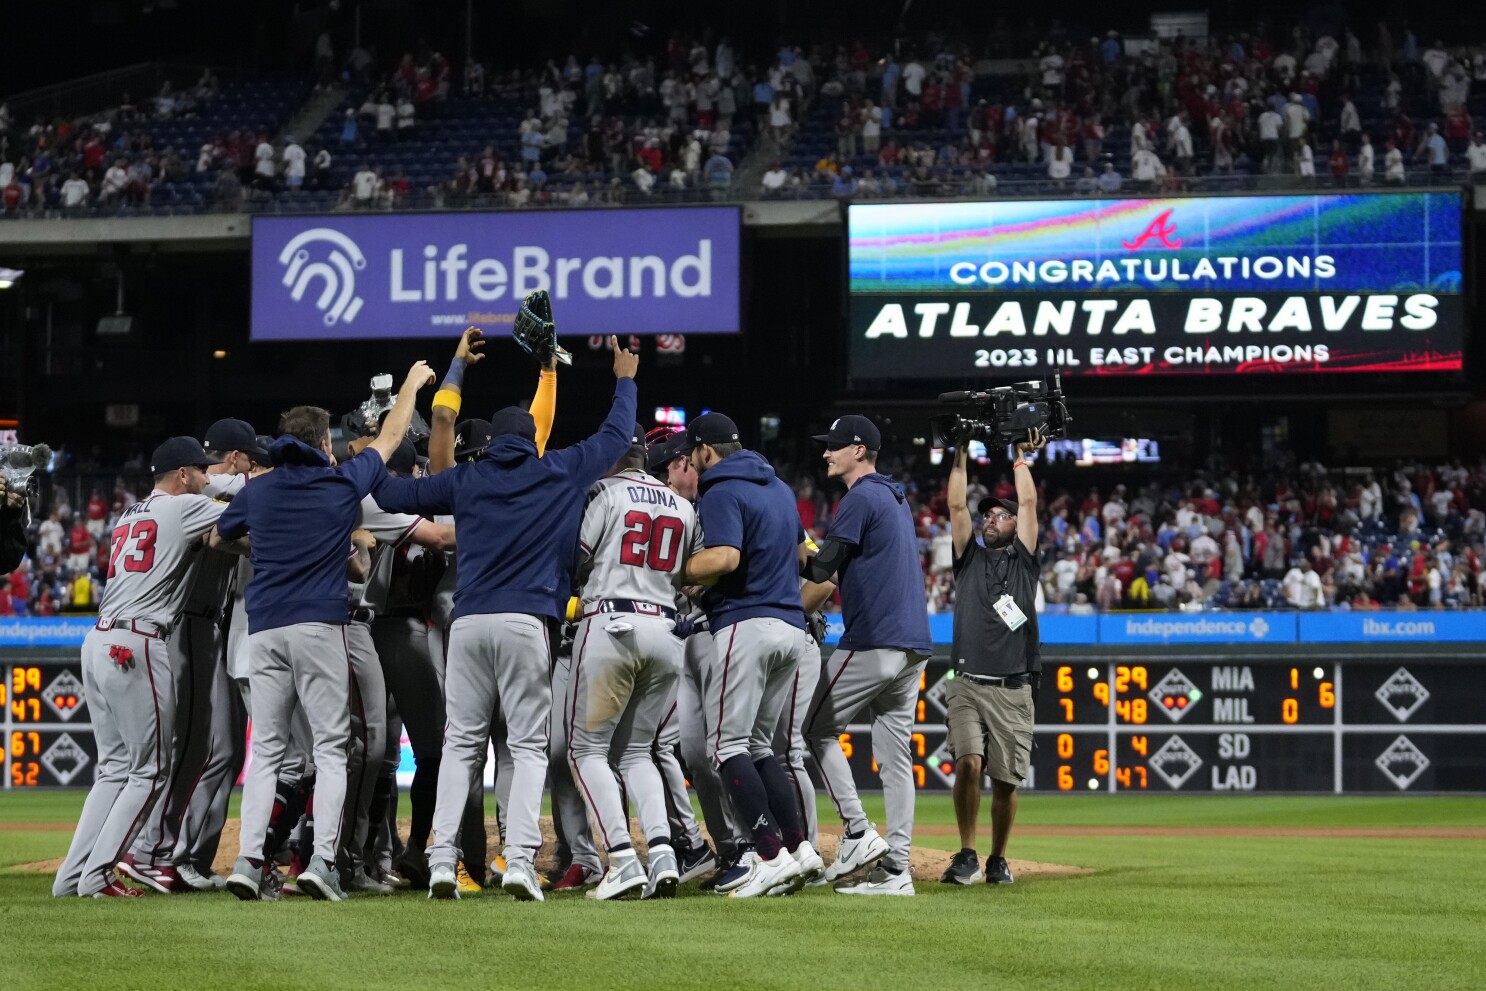 Braves City Connect gets high ranking from The Athletic